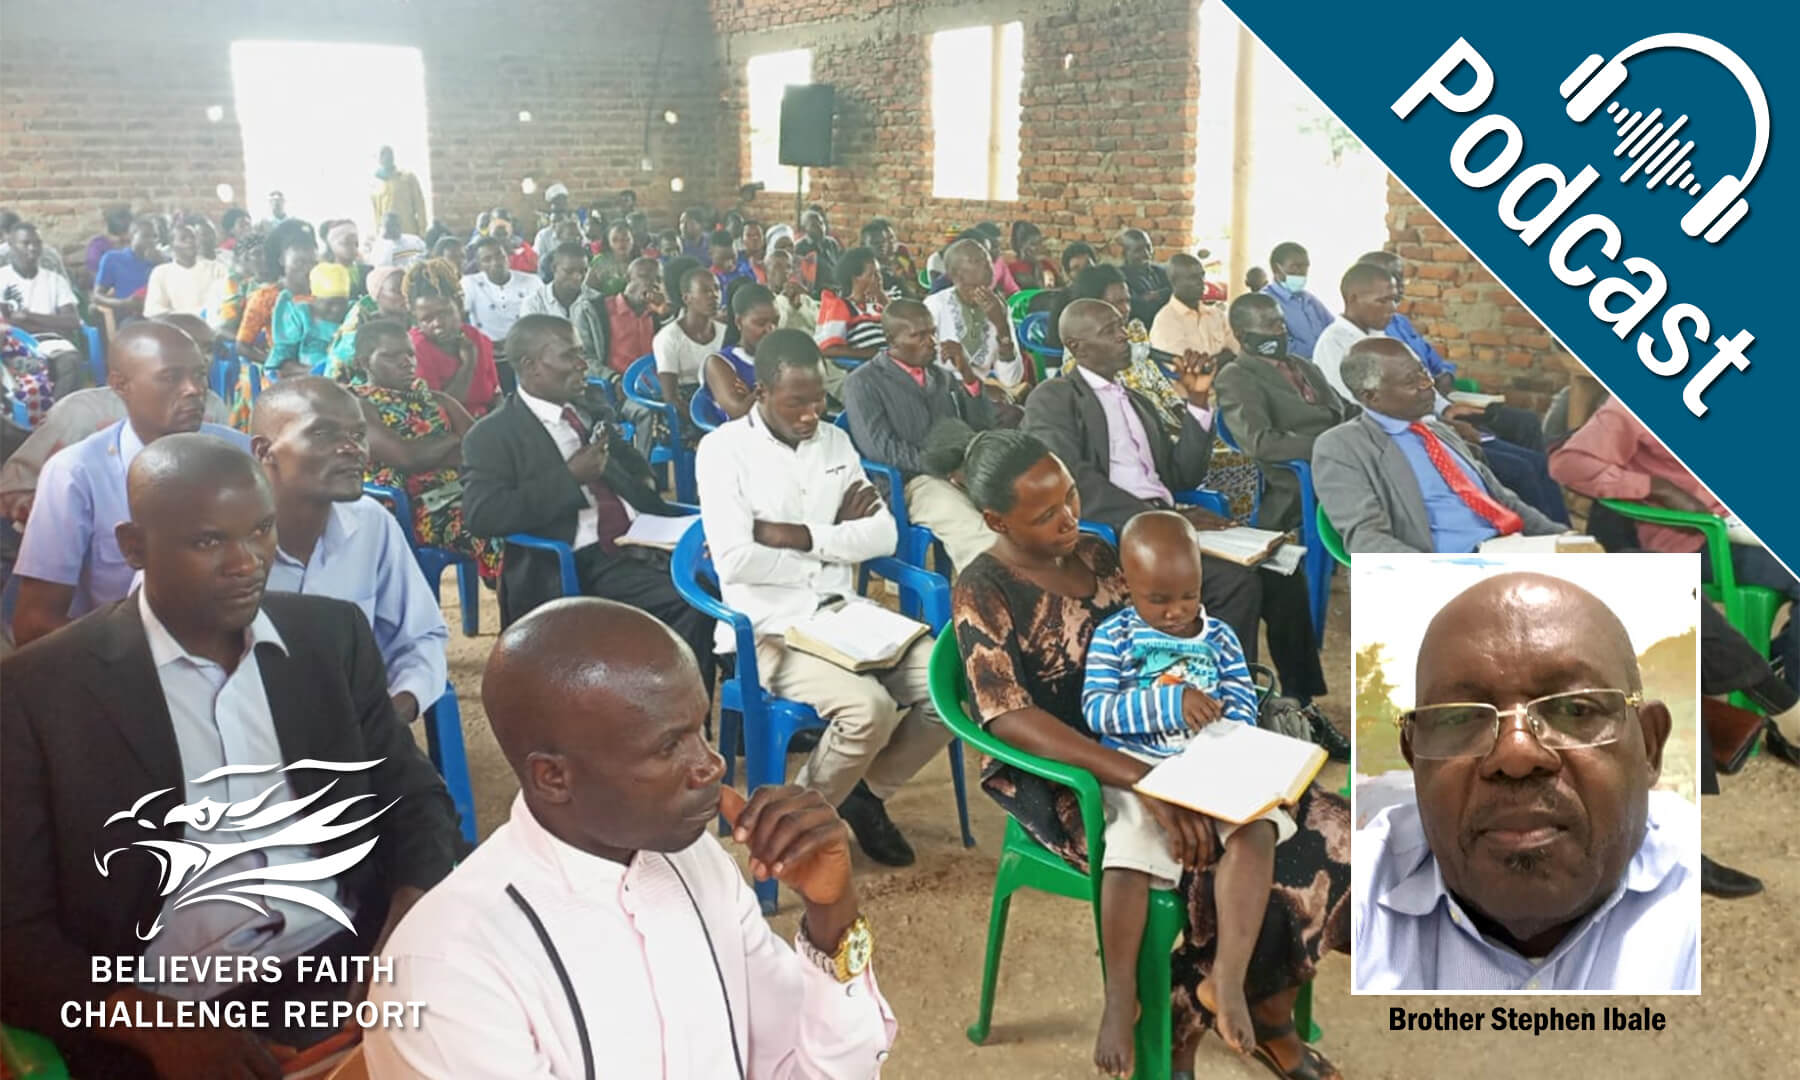 Missions Podcast: Ministers Meeting in Uganda: Brother Stephen Ibale Reports